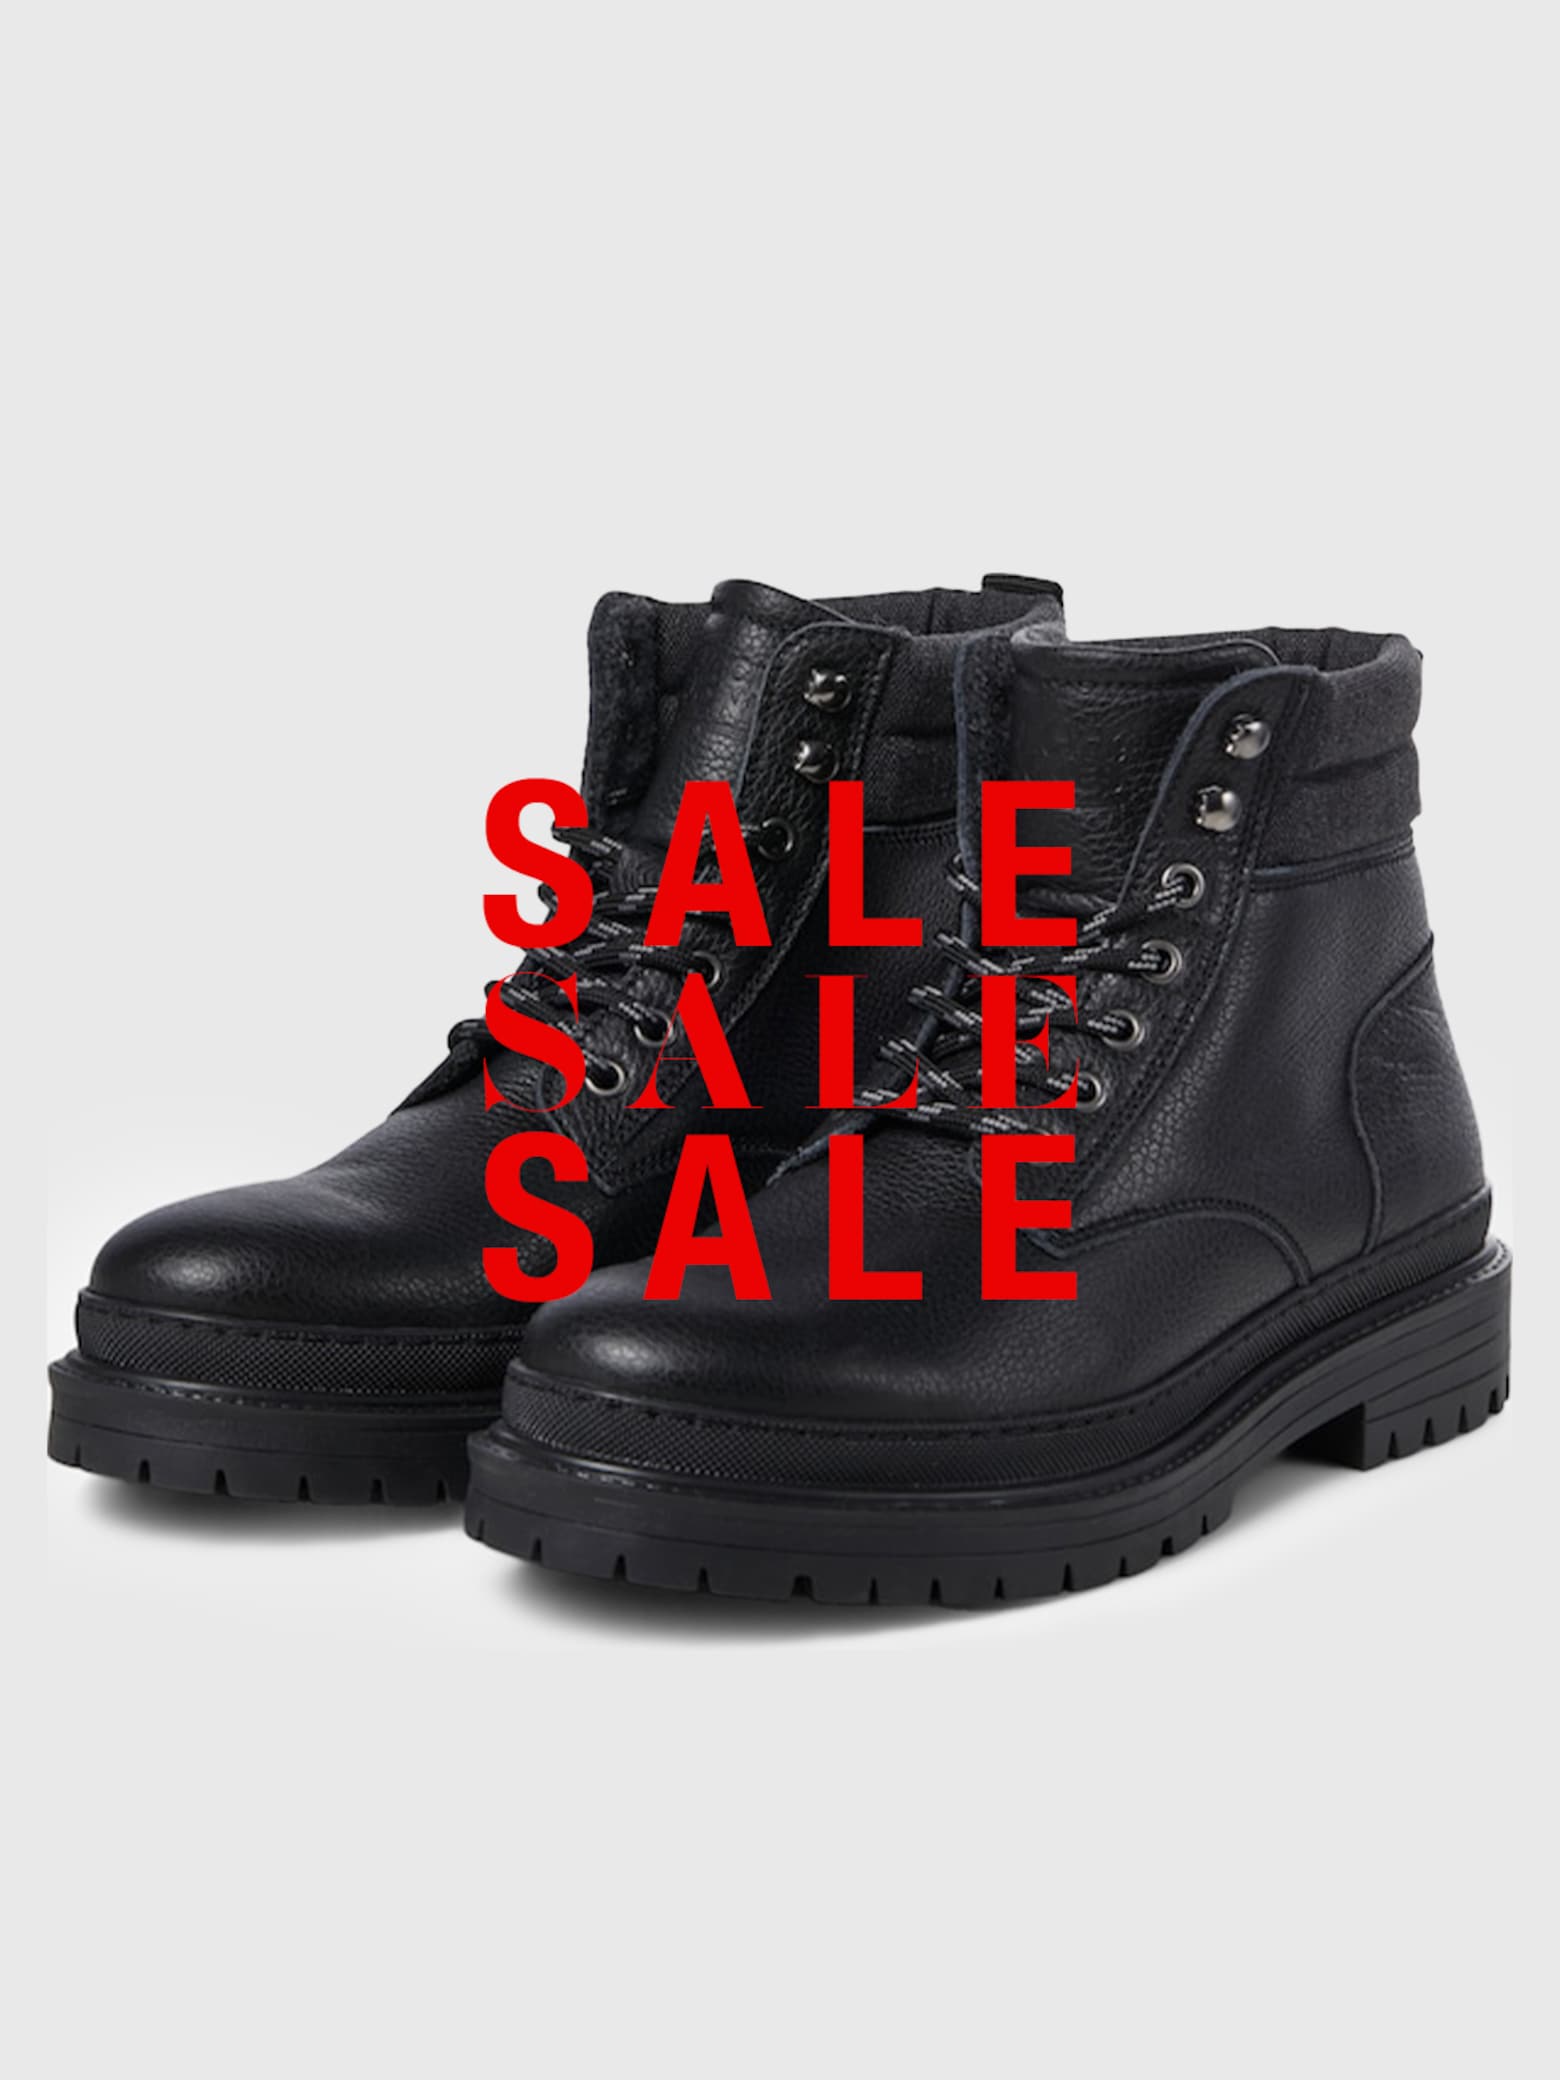 Save now! Boots